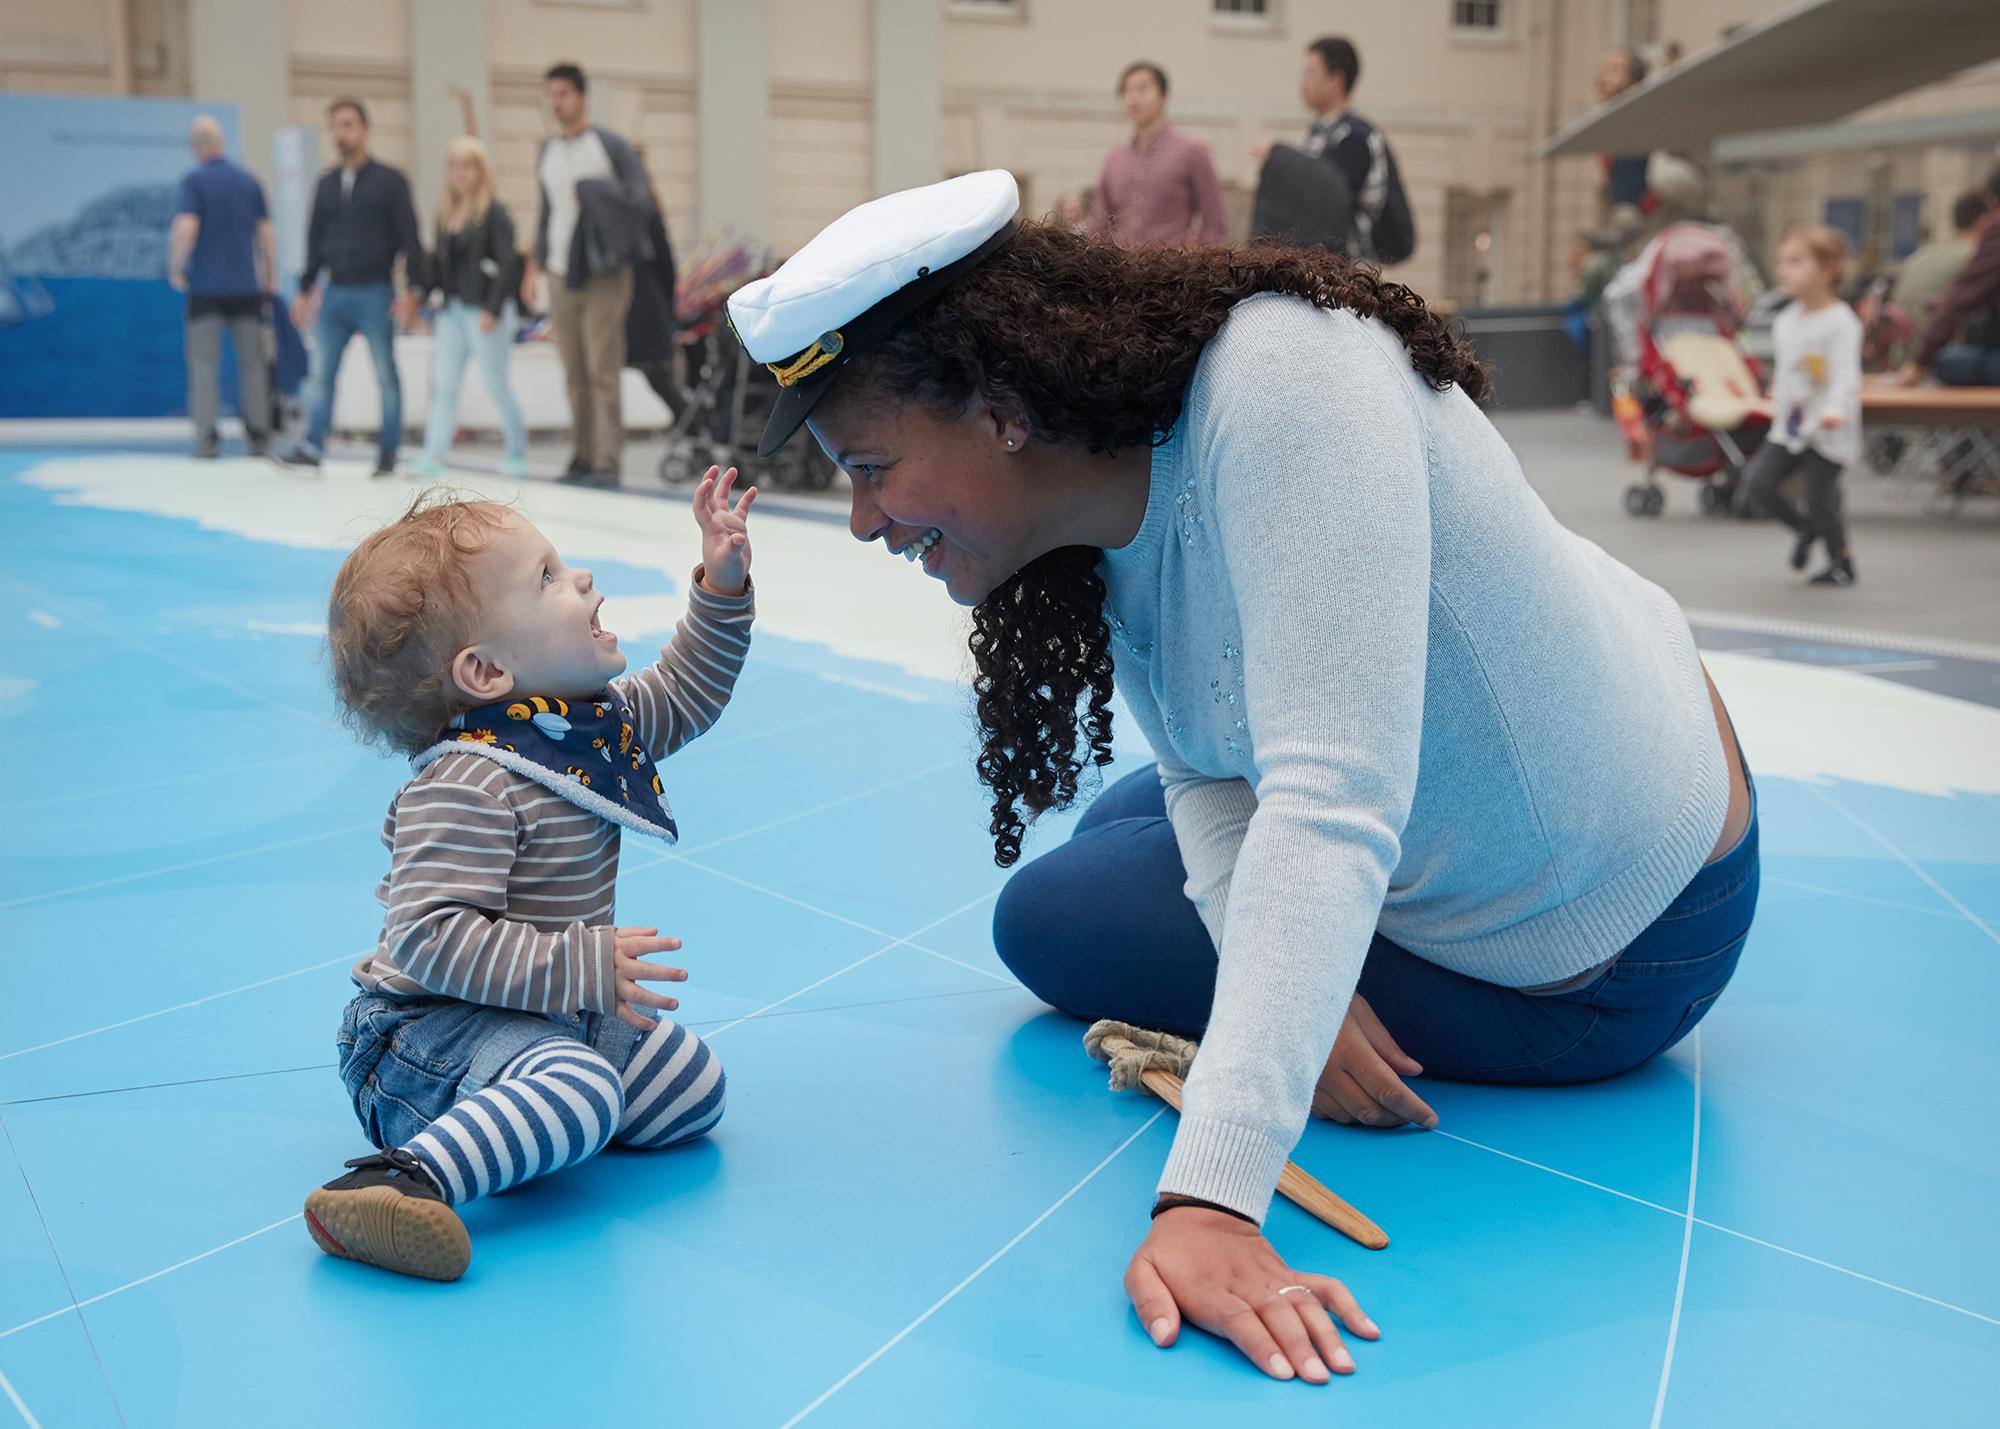 A toddler reaches up to an adult's sailor hat at the National Maritime Museum Ahoy children's gallery.